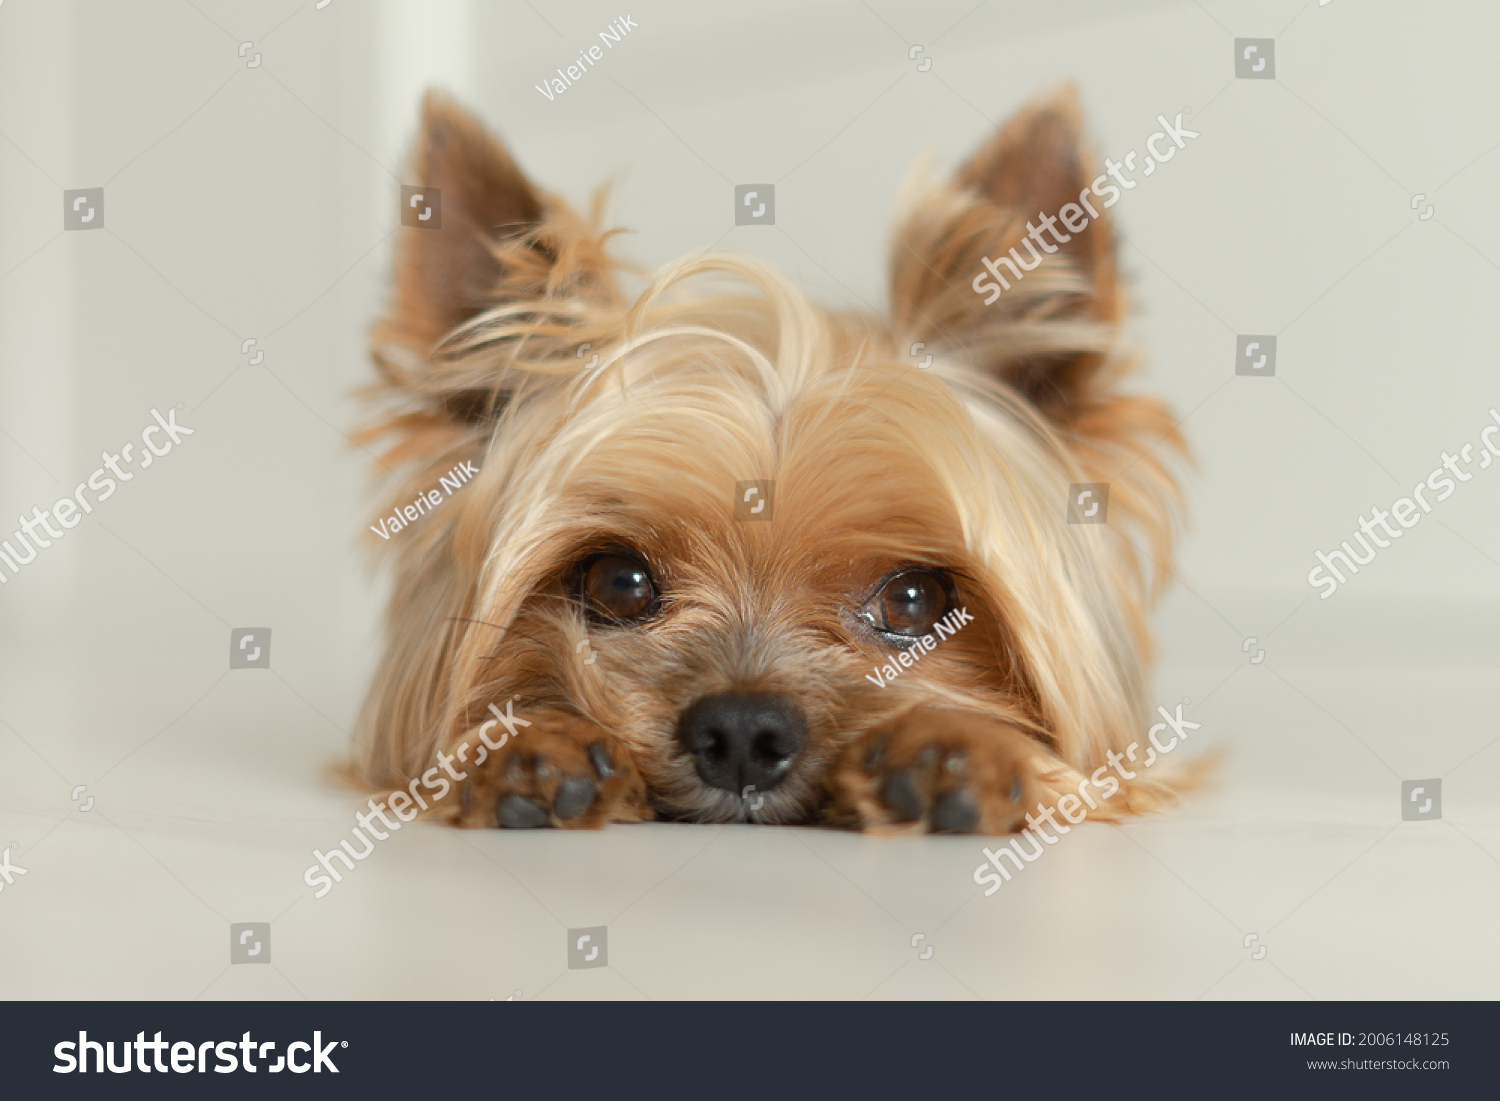 dog Yorkshire Terrier lies on the floor with paws forward, white background, light photo #2006148125